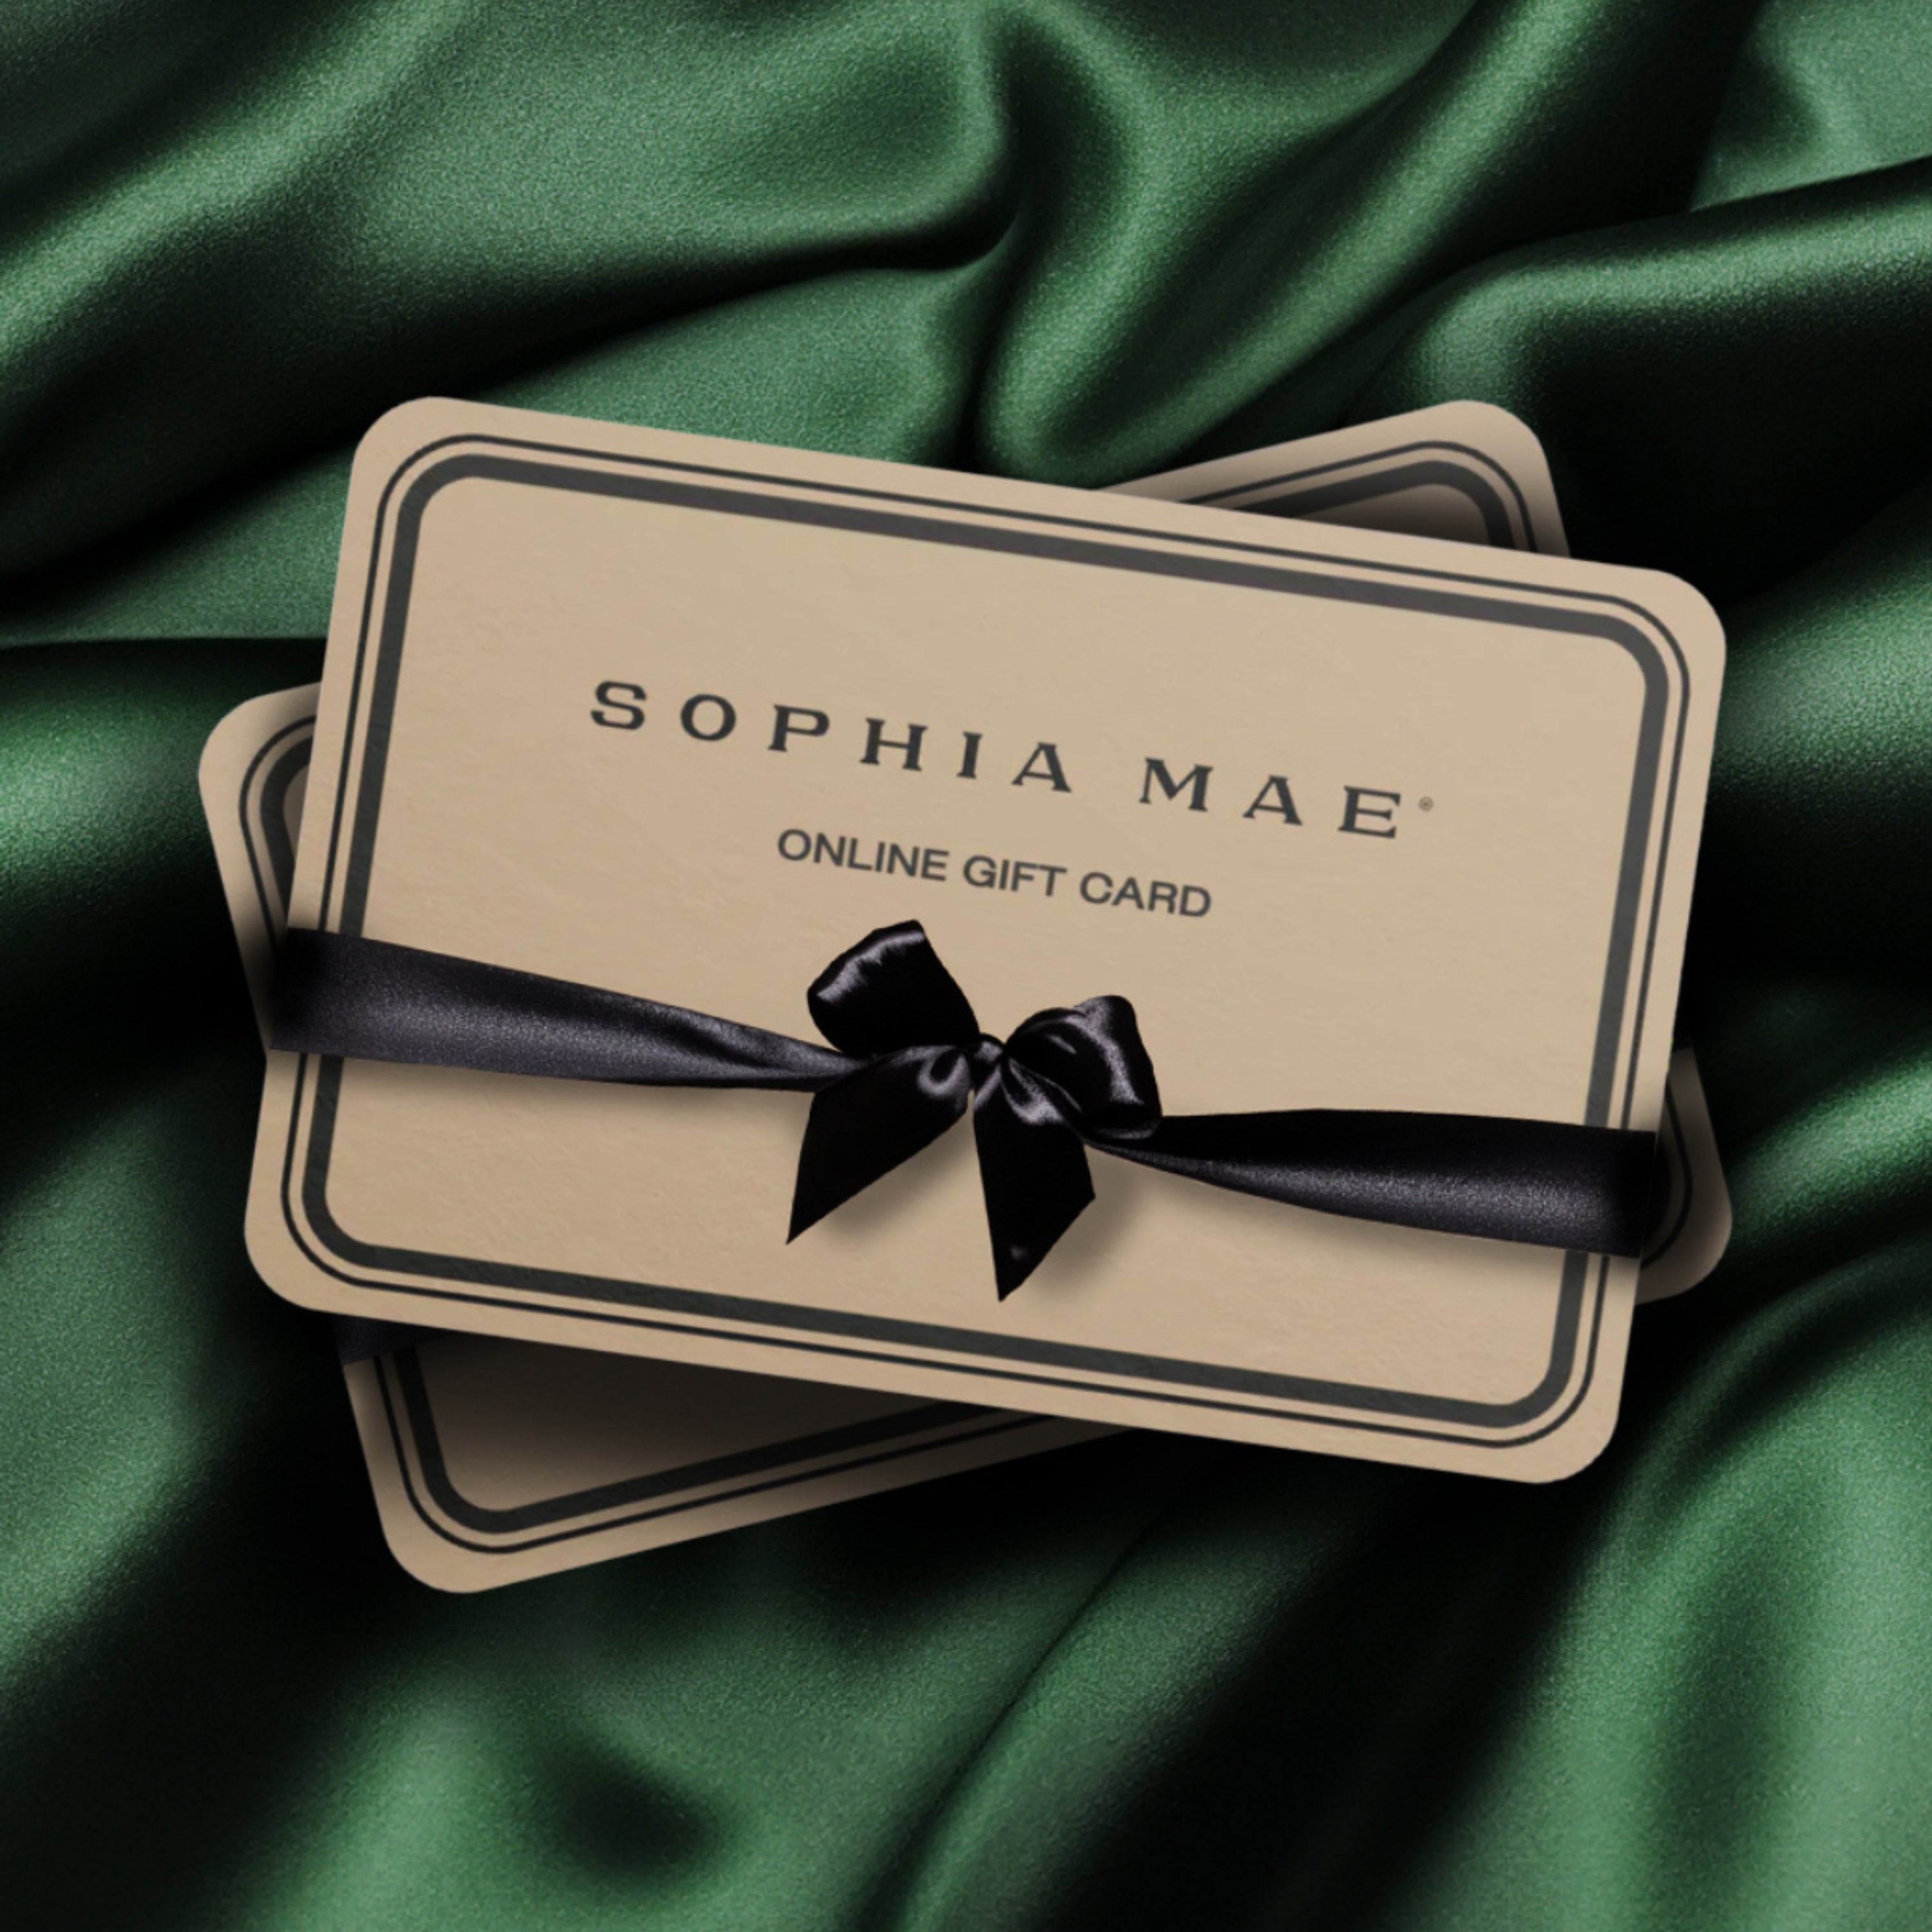 ONLINE GIFT CARD | SOPHIA MAE by Monica Geuze